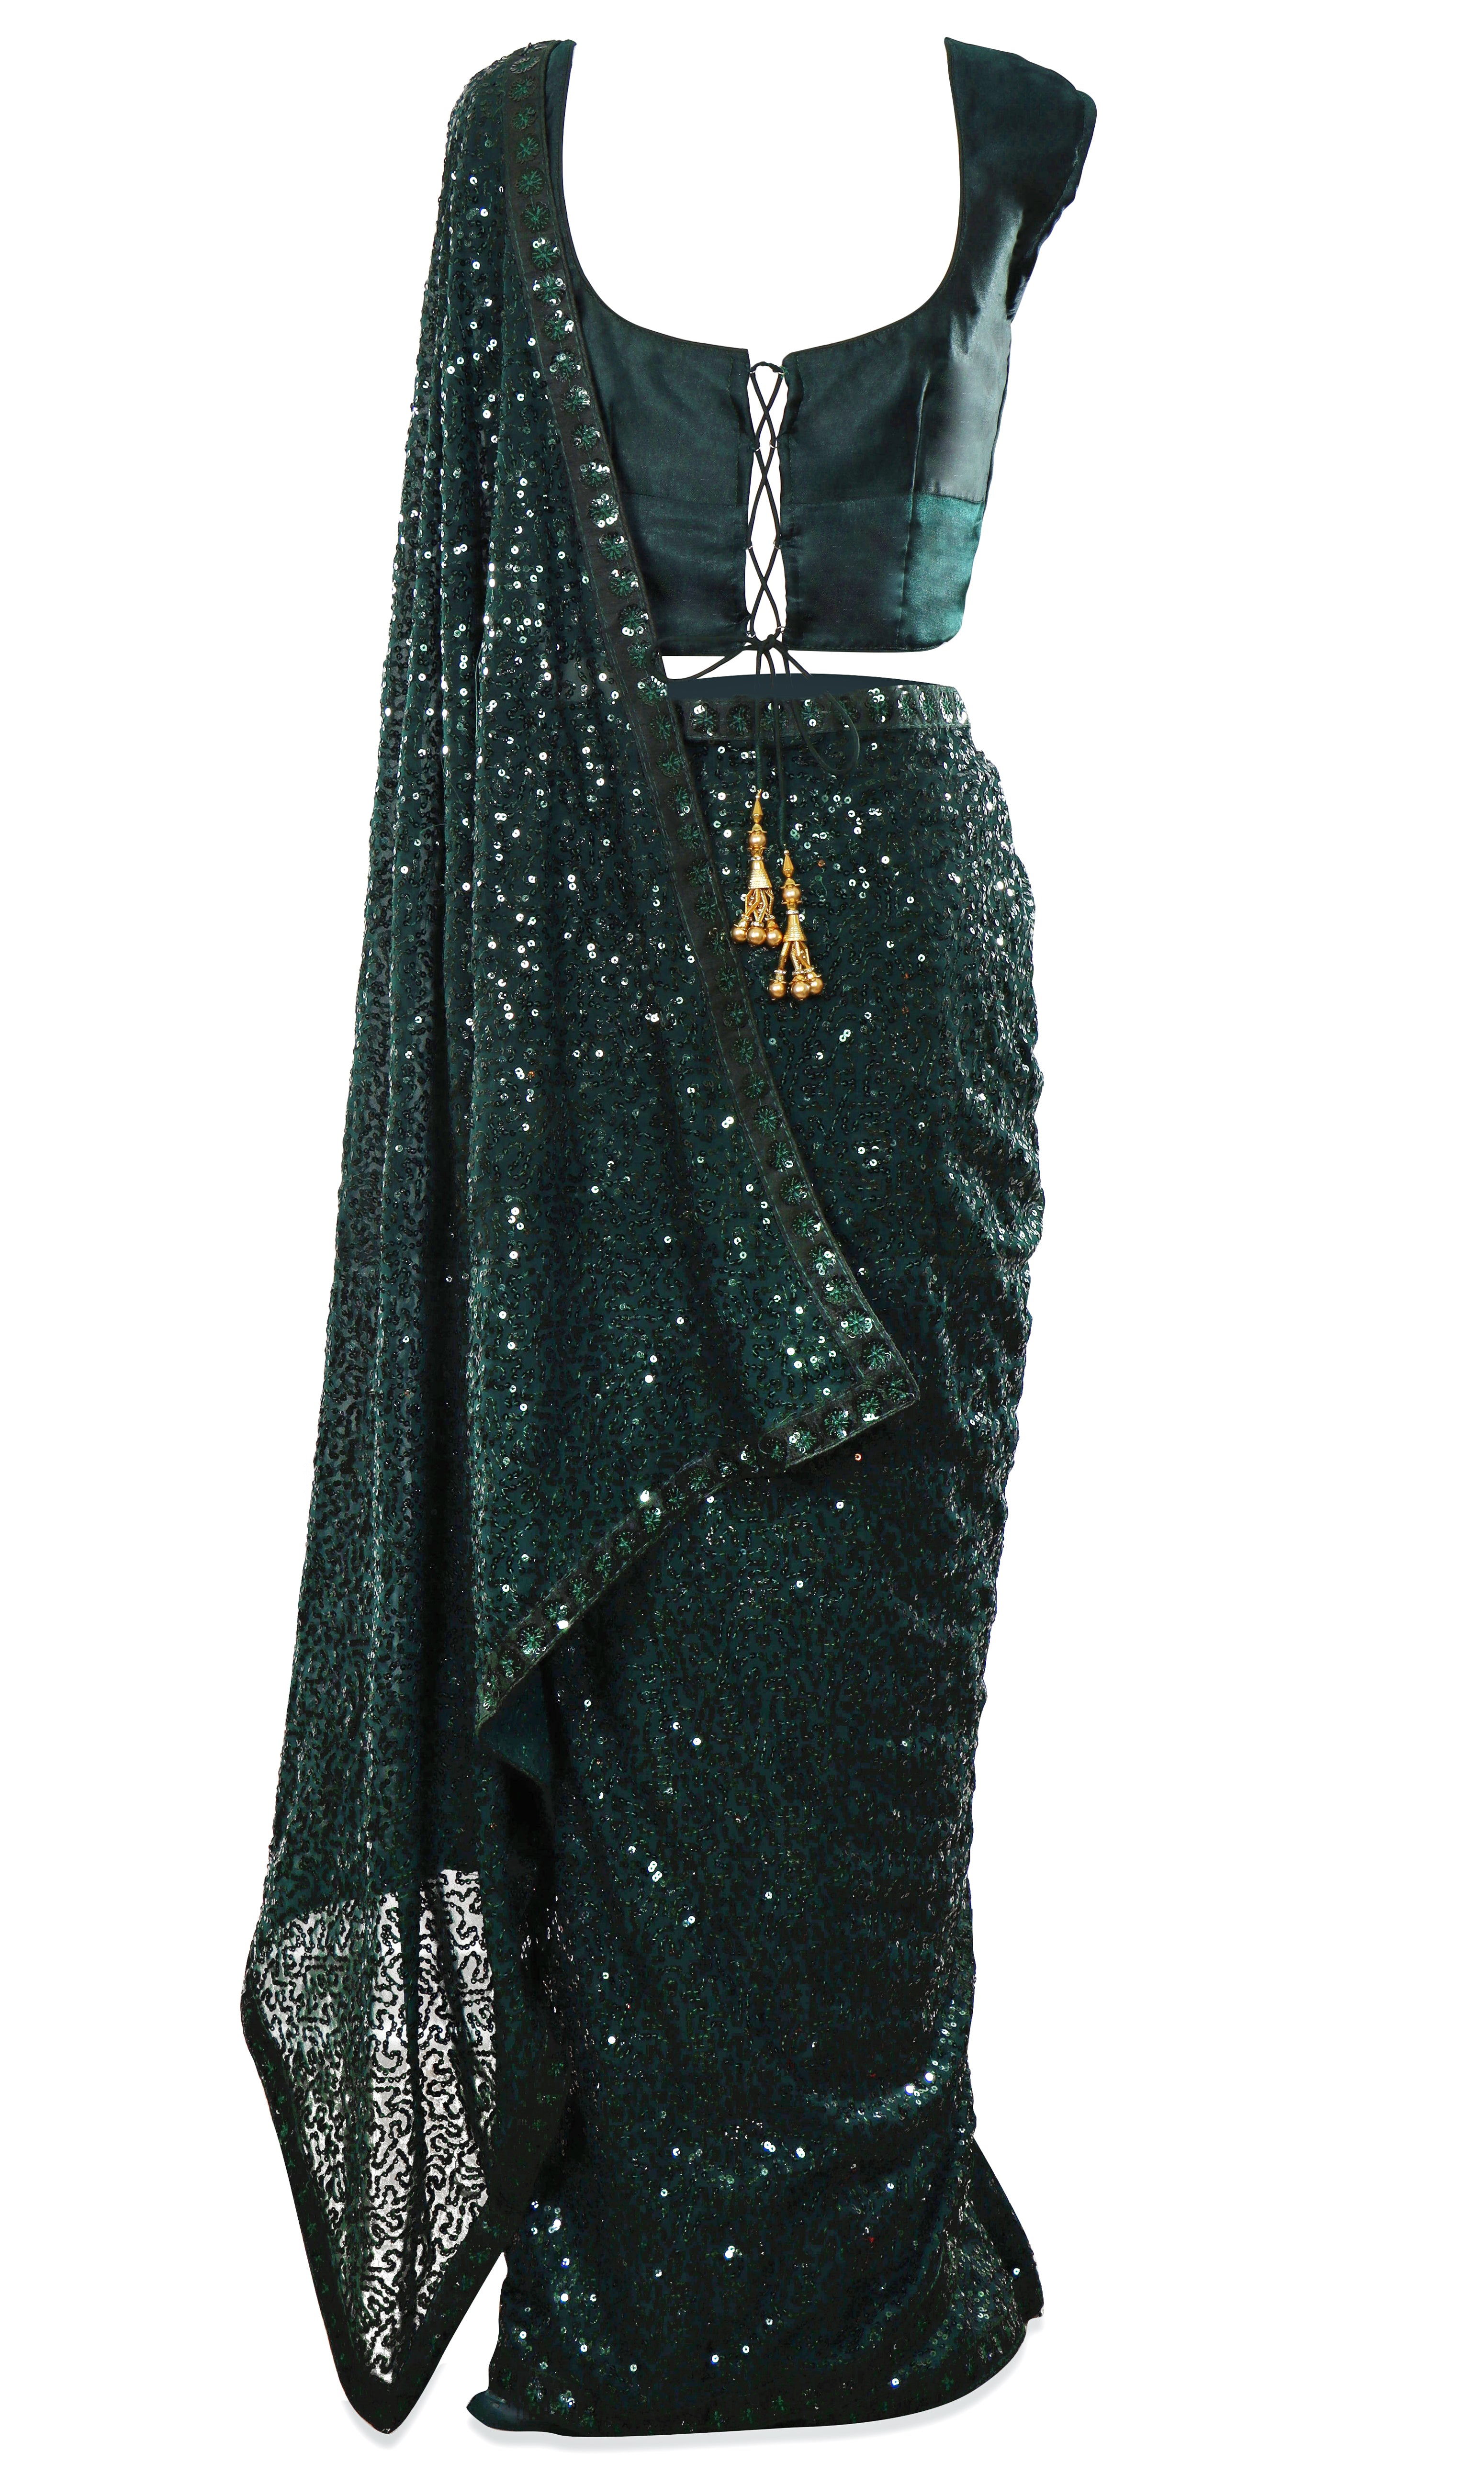 Dark green saree with Matching petticoat, front and the back has tie strings to adjust sizing! 